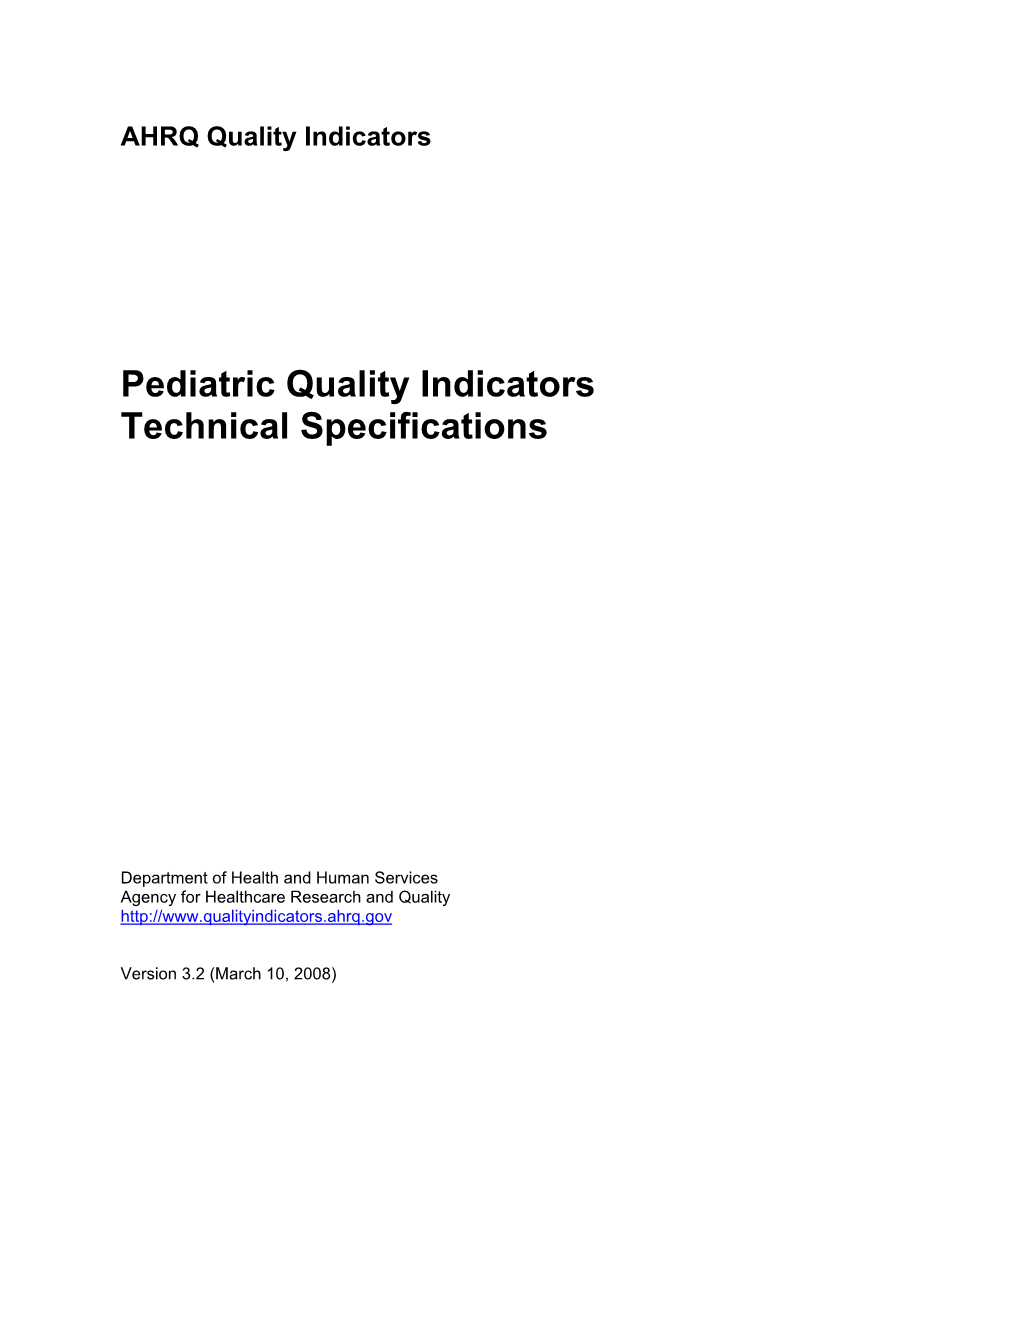 Pediatric Quality Indicators Technical Specifications